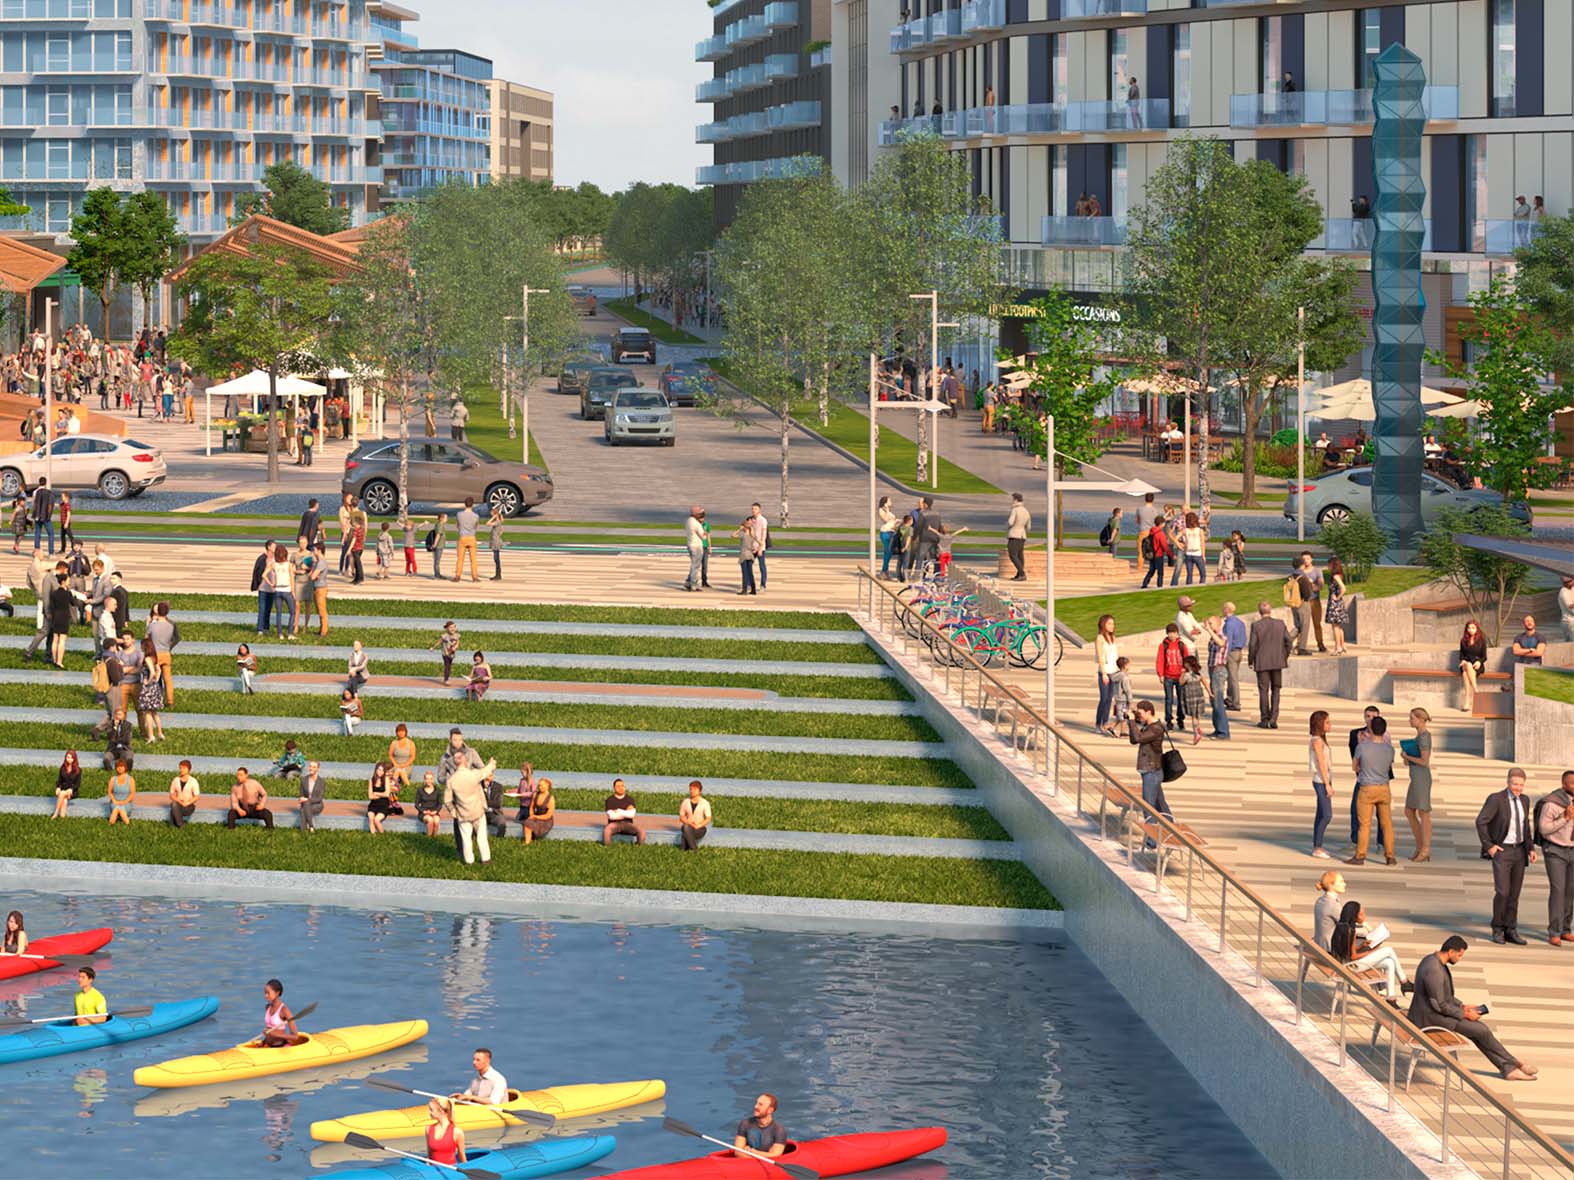 lakeview village square and waterfront rendering